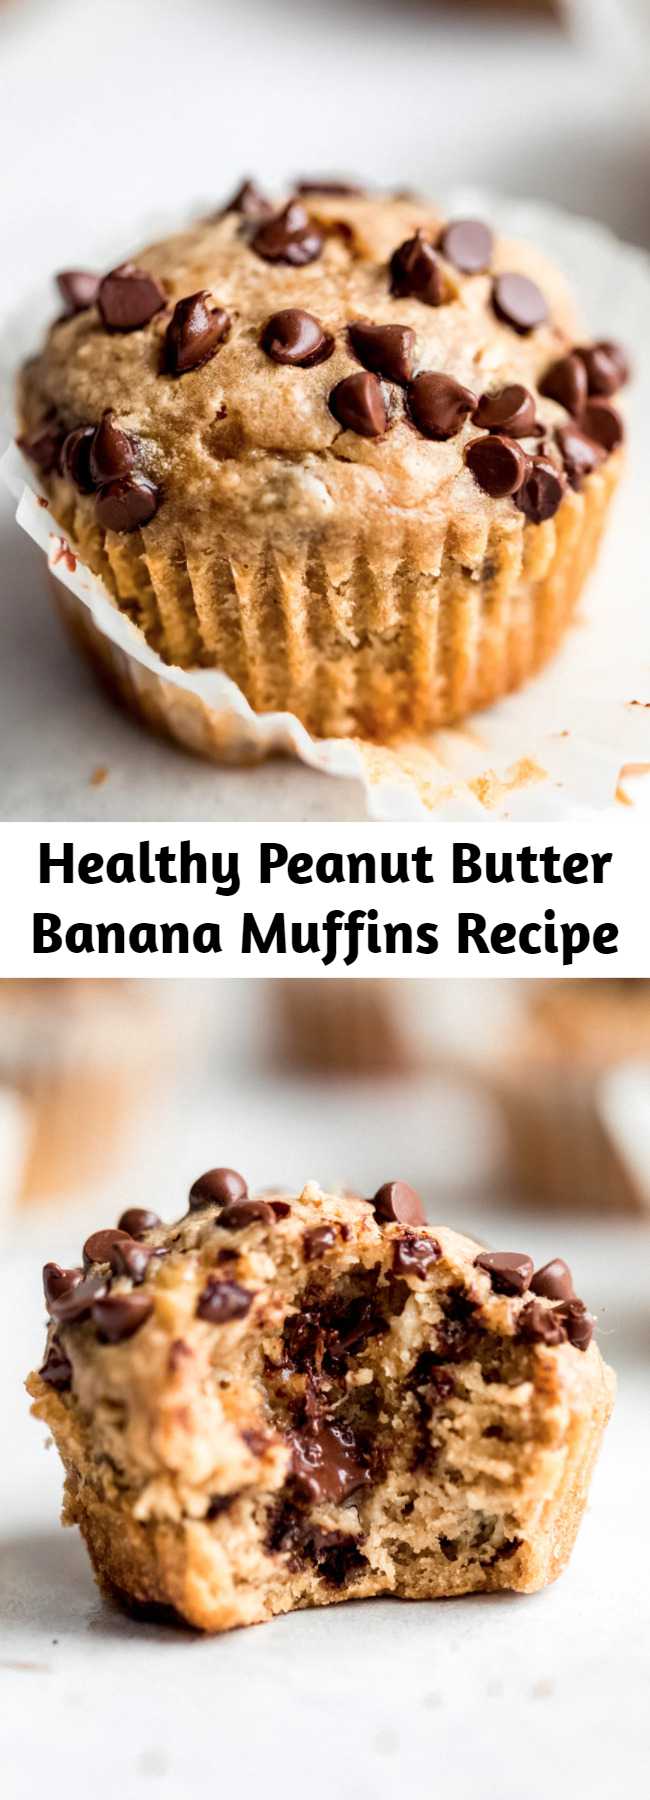 Healthy Peanut Butter Banana Muffins Recipe - The BEST peanut butter banana muffins that are packed with protein and peanut butter flavor. Naturally sweetened with pure maple syrup, gluten free thanks to oat flour and a great on-the-go healthy breakfast or snack. Try them with mini chocolate chips! #glutenfree #glutenfreesnack #dairyfree #kidfriendly #kidfood #muffins #muffinrecipe #peanutbutter #healthysnack